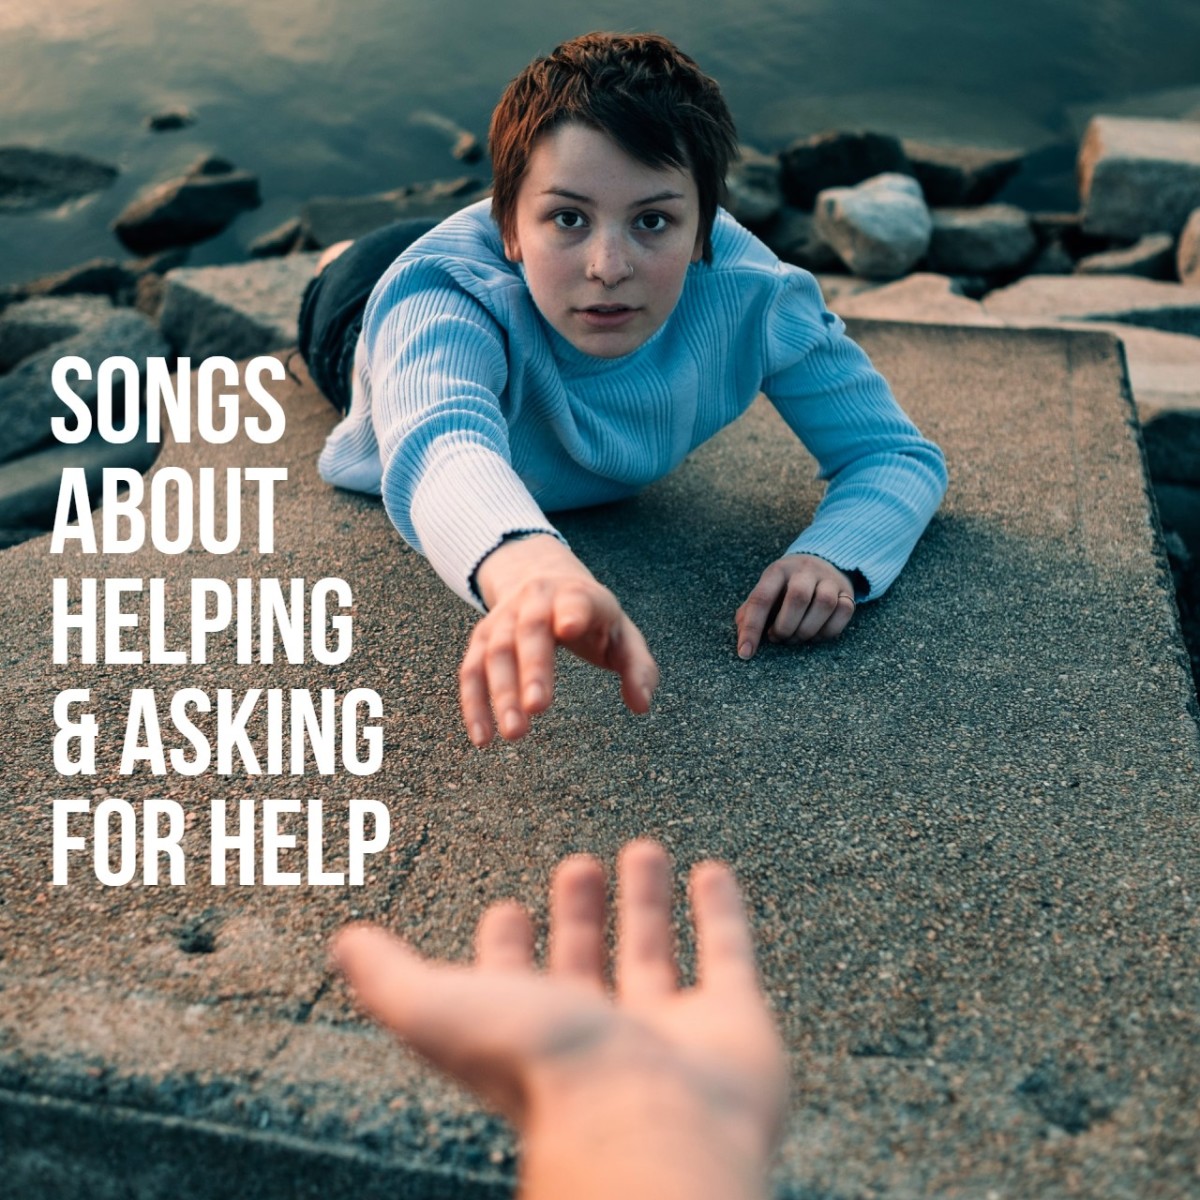 76 Songs About Helping Others or Asking for Help